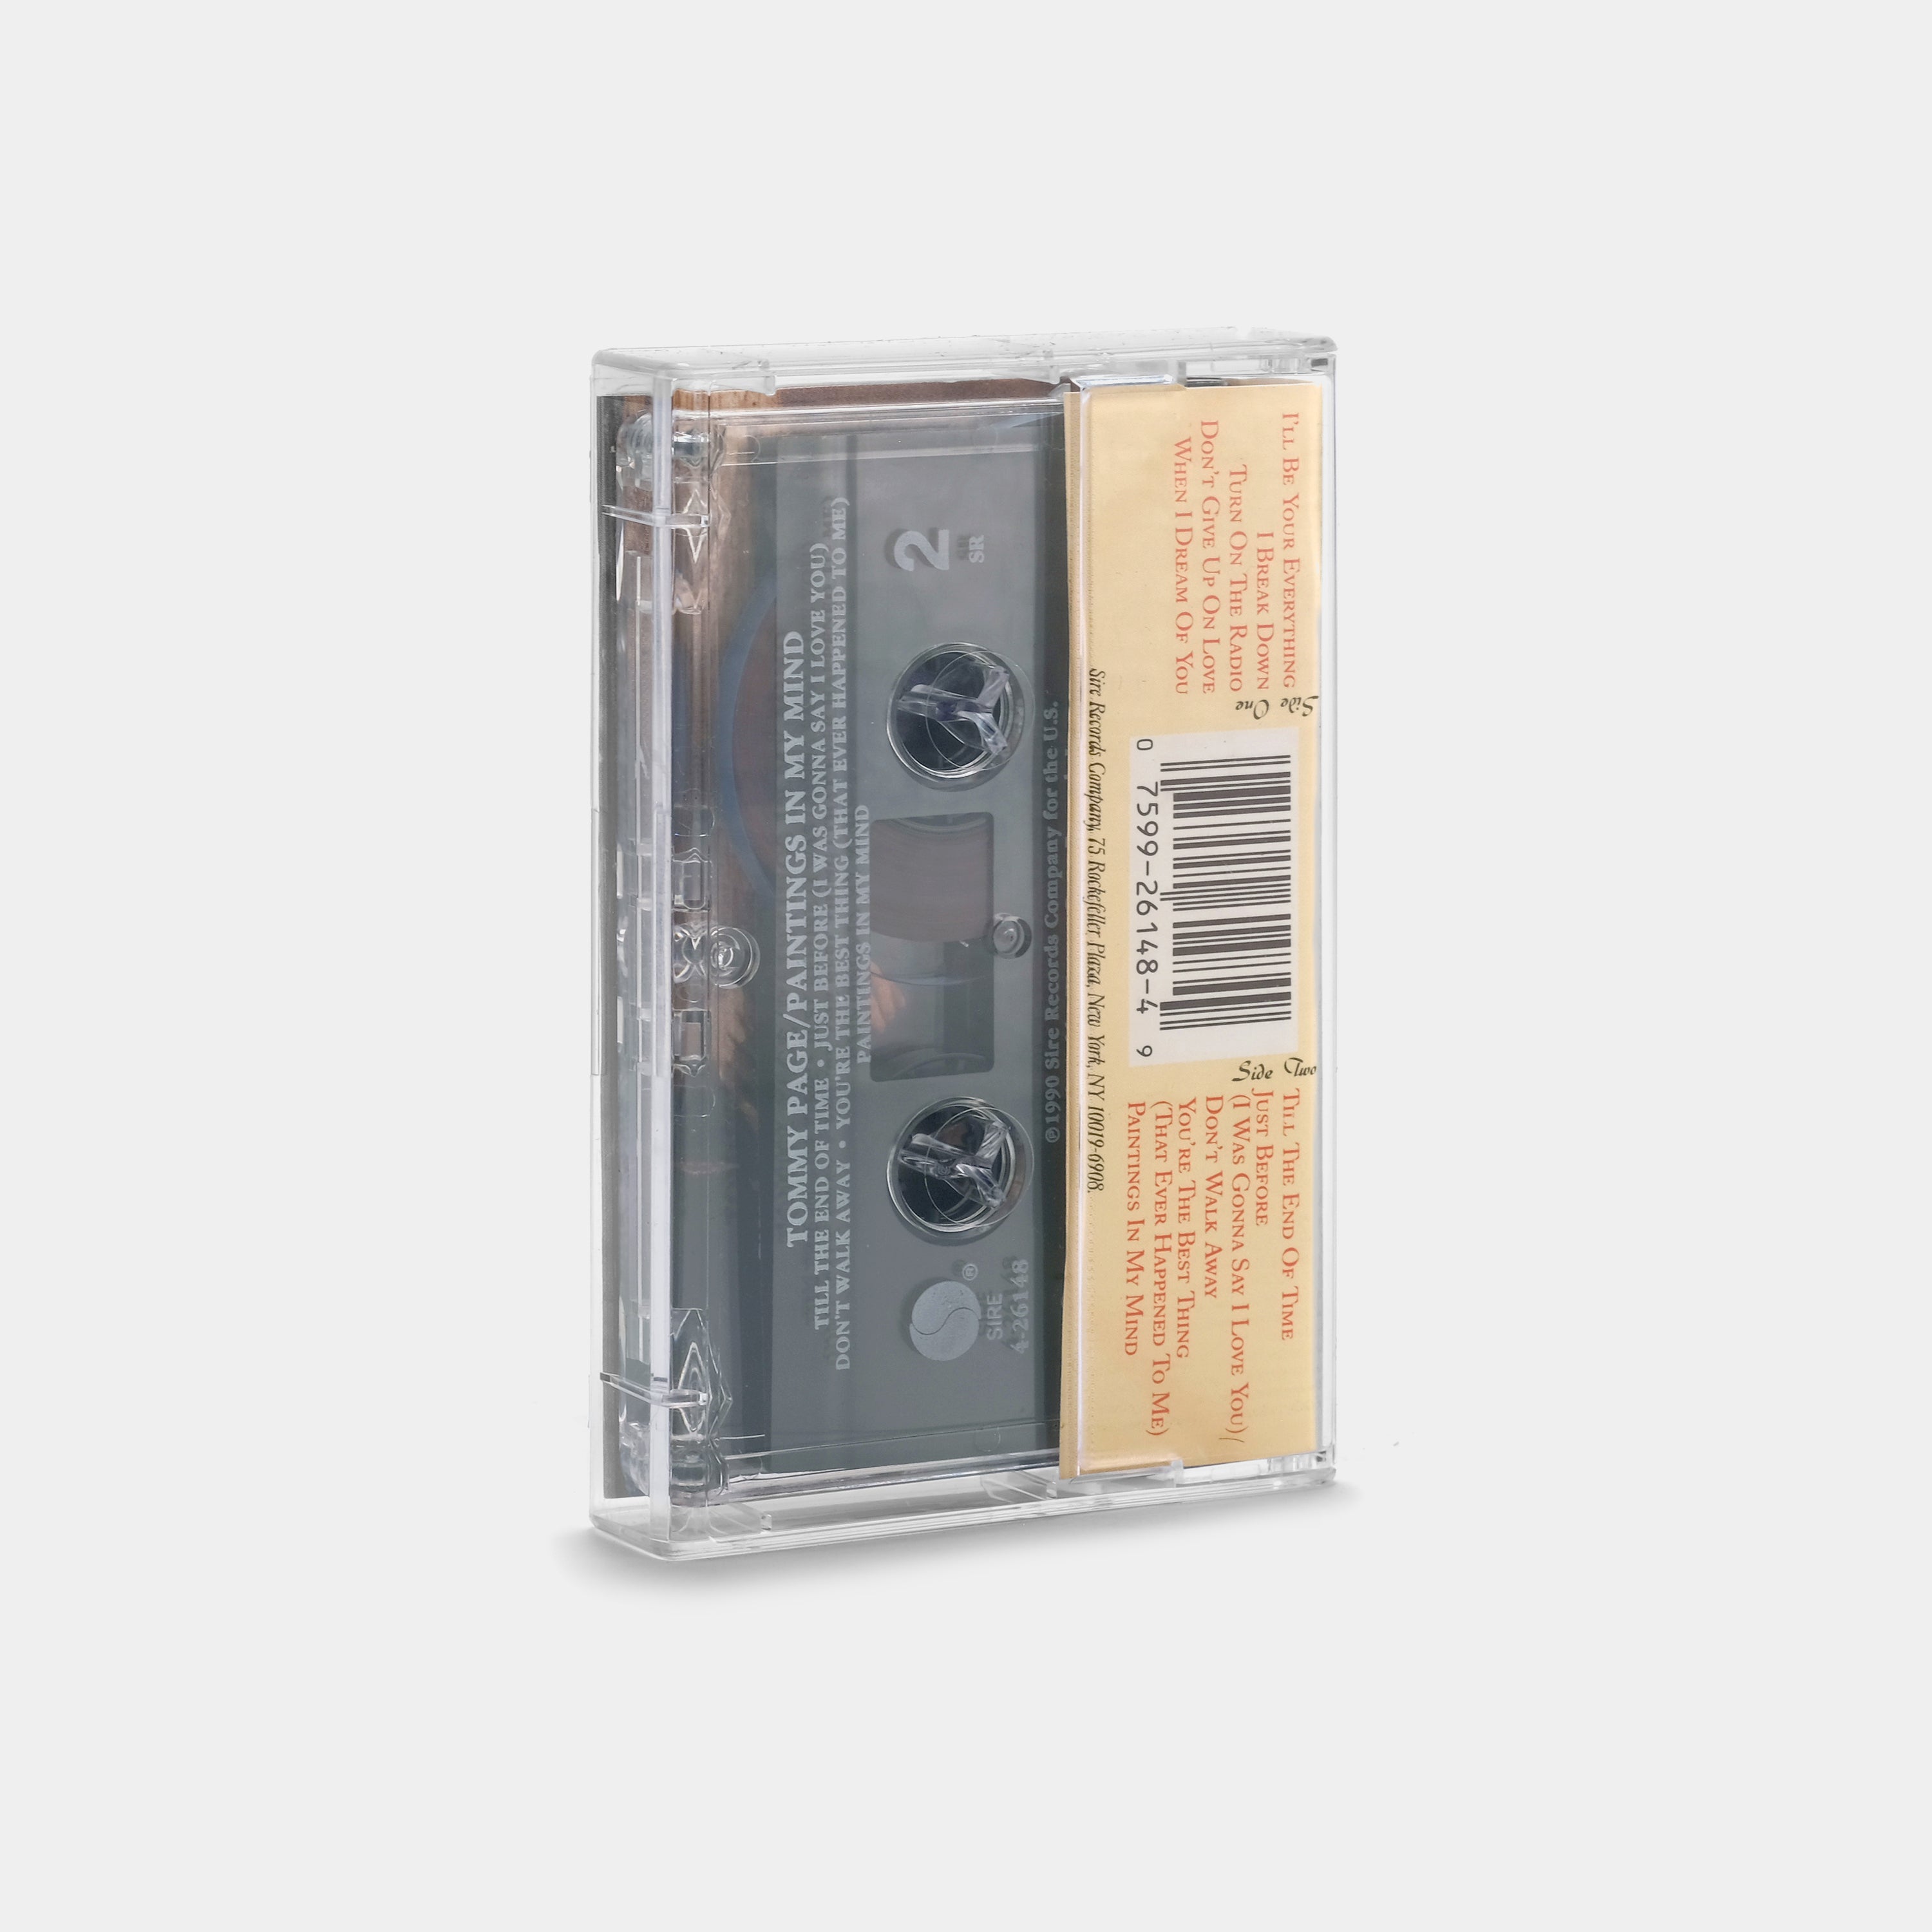 Tommy Page - Paintings on my Mind Cassette Tape